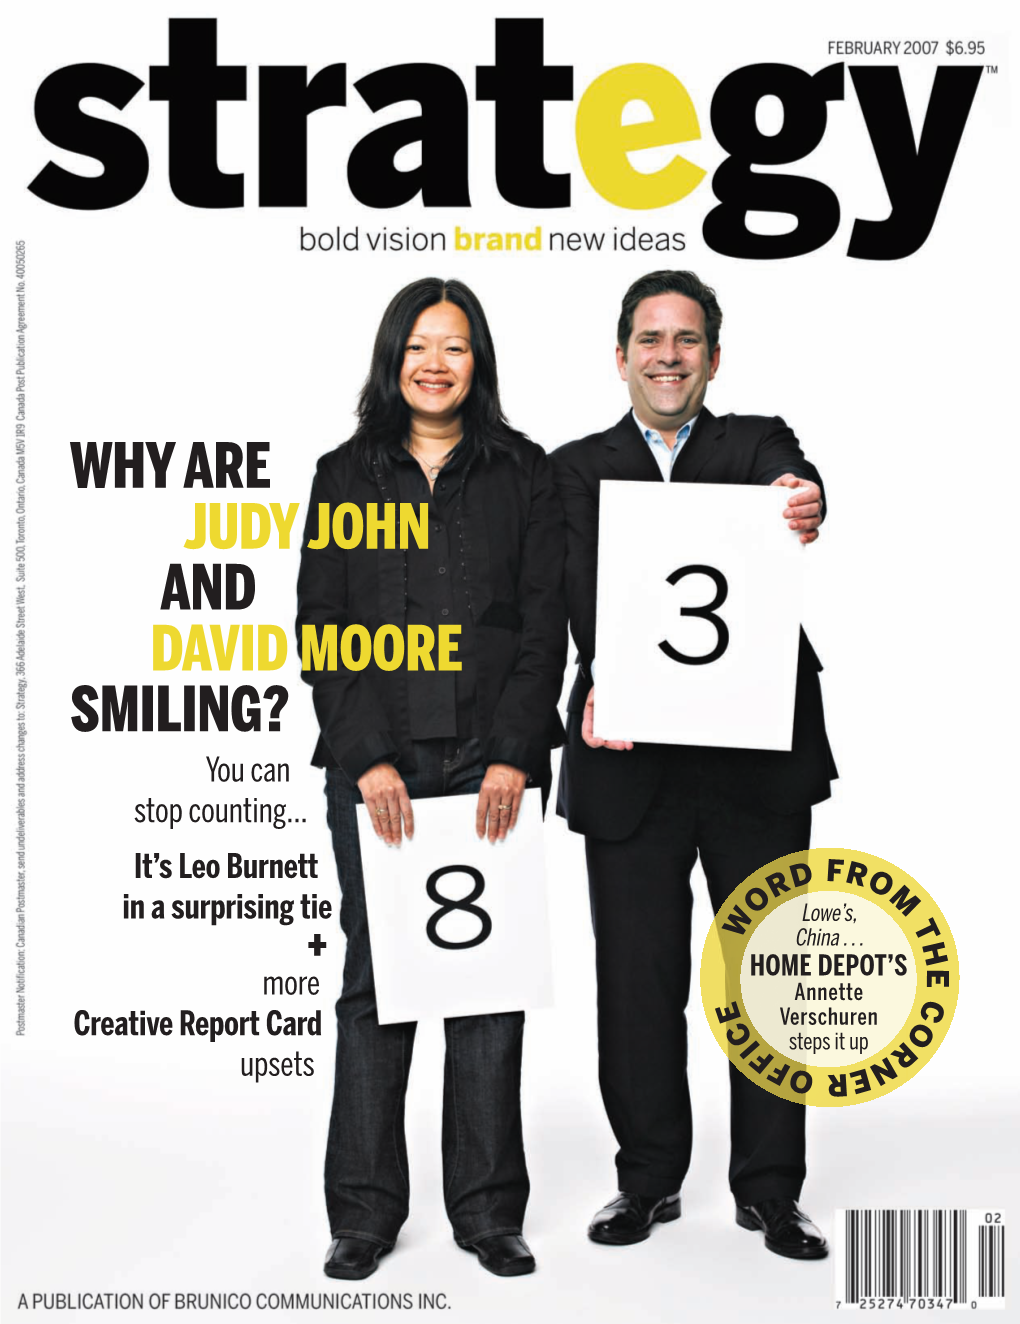 WHY ARE JUDY JOHN and DAVID MOORE SMILING? You Can Stop Counting